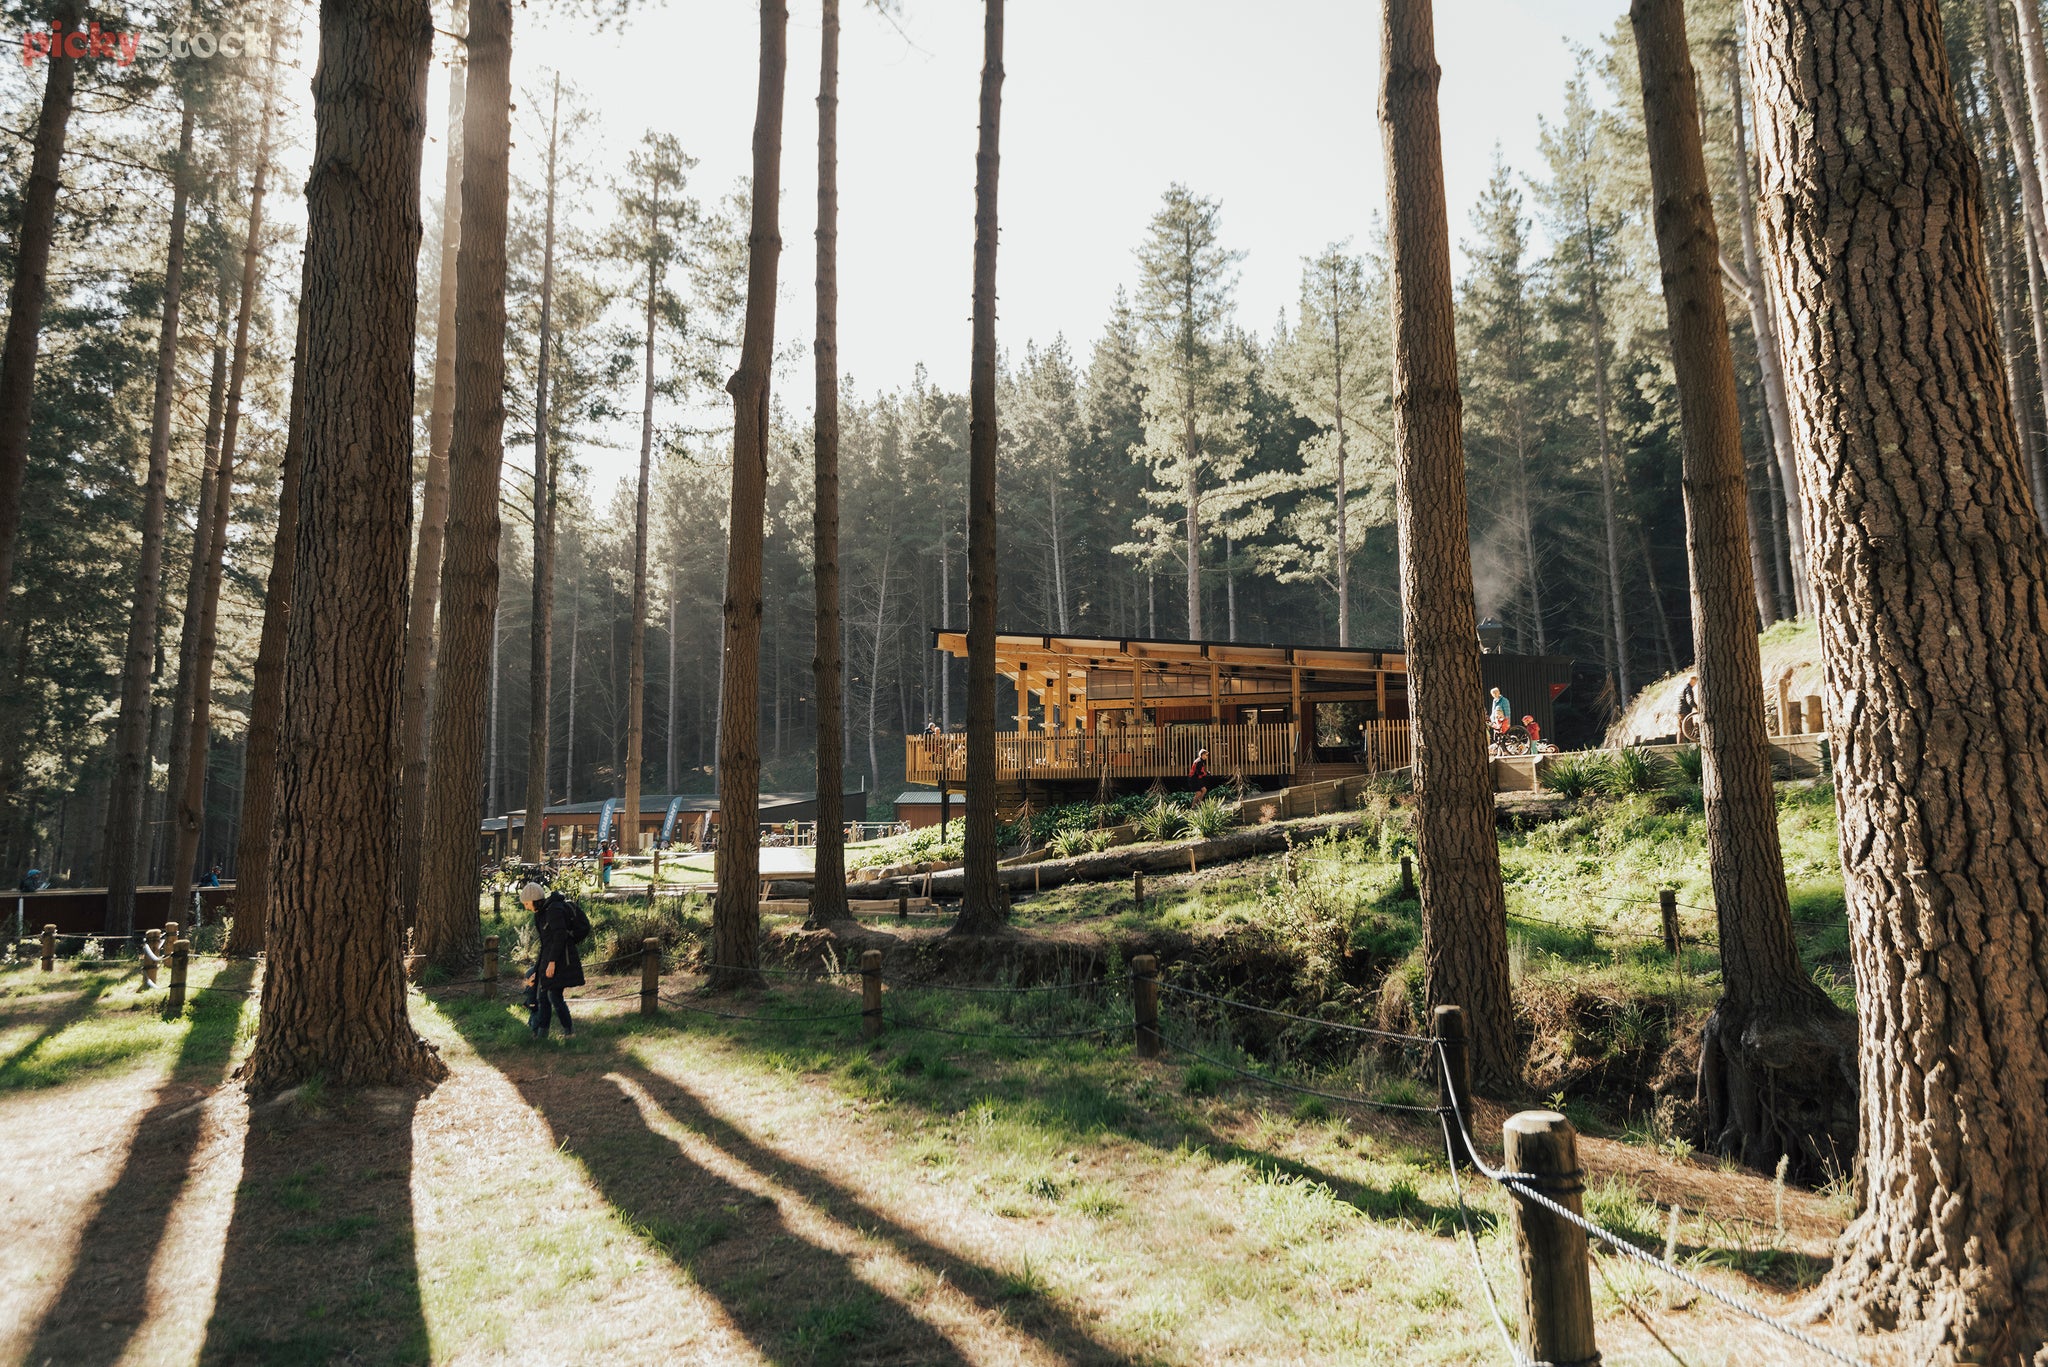 In a pine forest there's a building which has a deck and a sloped roof. People walk through the forest, with mountain bikes.